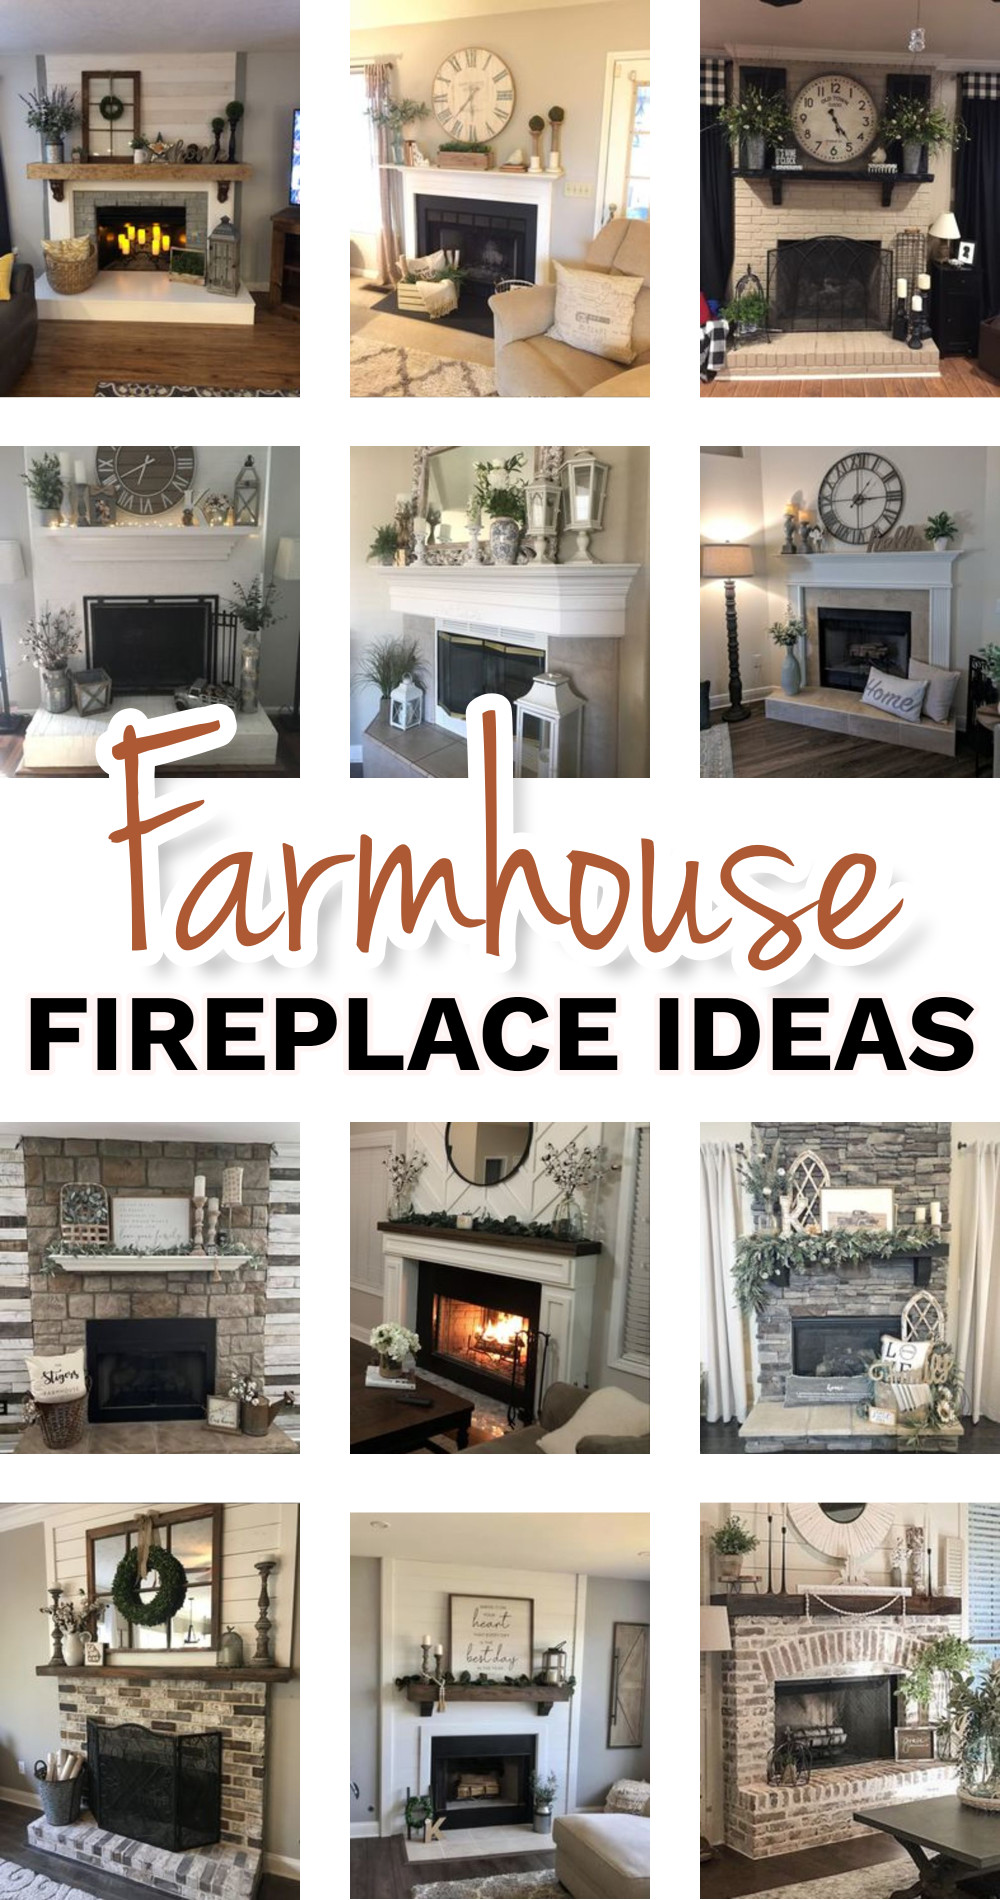 Farmhouse Fireplace Ideas and Pictures